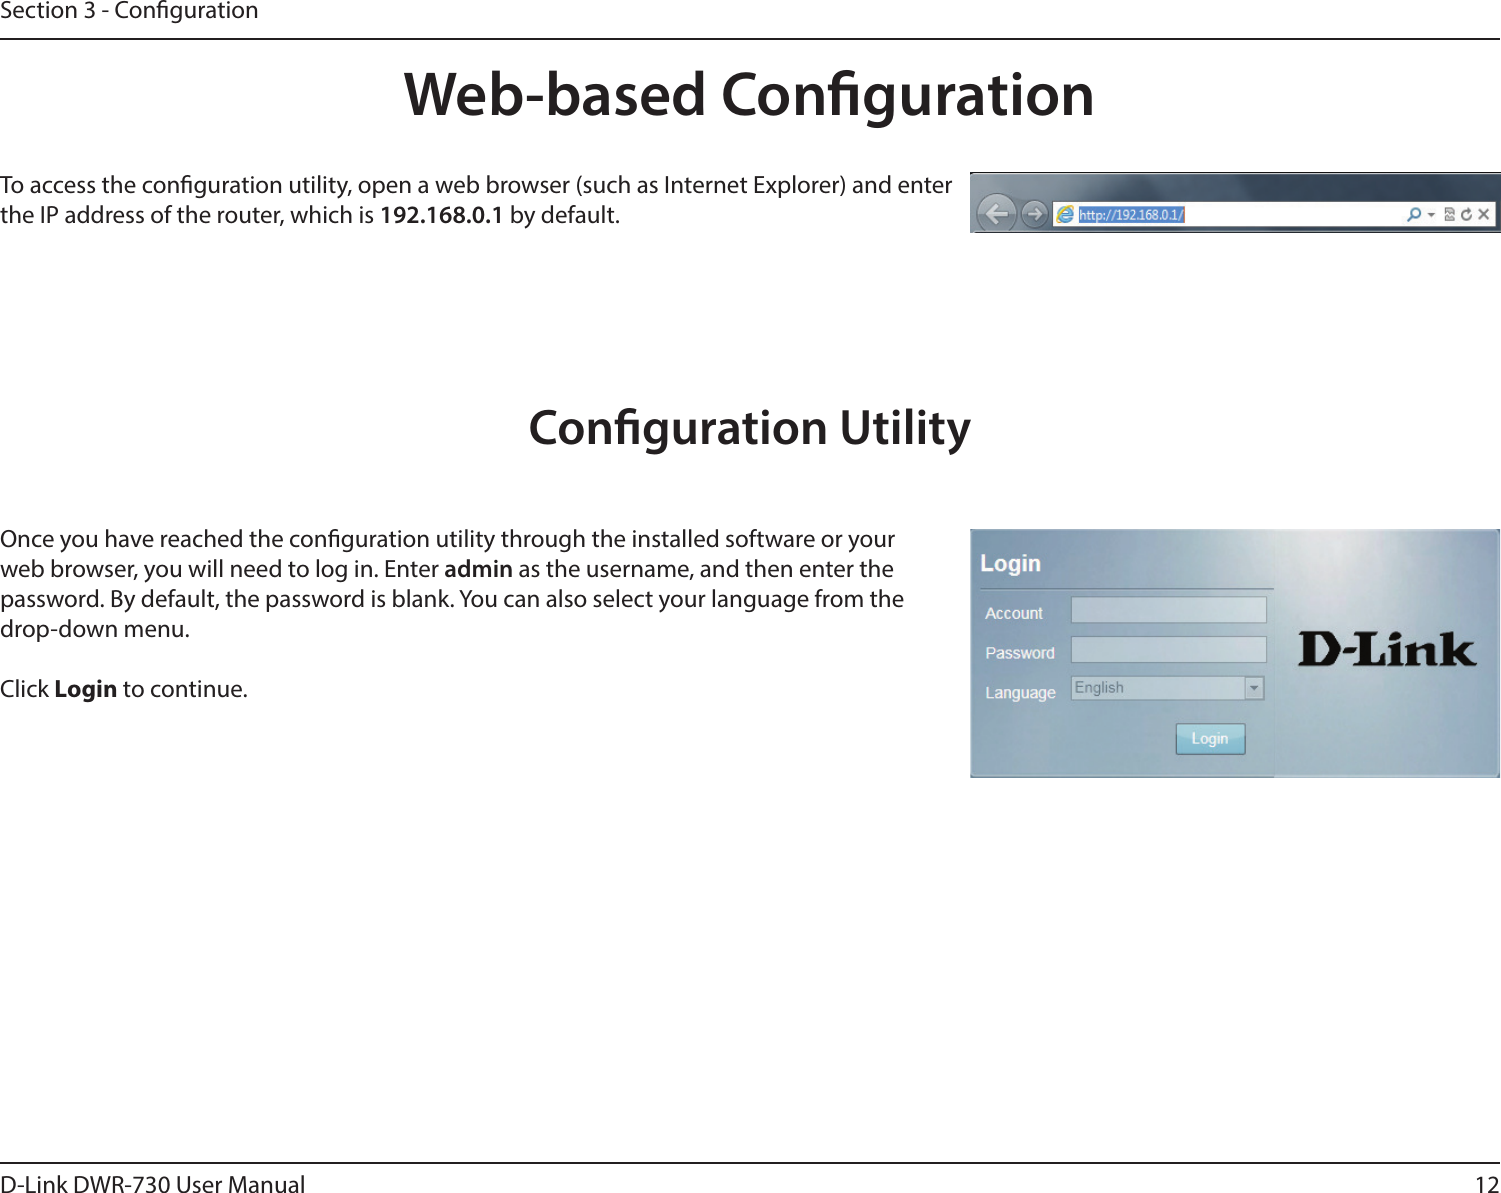 12D-Link DWR-730 User ManualSection 3 - CongurationWeb-based CongurationTo access the conguration utility, open a web browser (such as Internet Explorer) and enter the IP address of the router, which is 192.168.0.1 by default.Once you have reached the conguration utility through the installed software or your web browser, you will need to log in. Enter admin as the username, and then enter the password. By default, the password is blank. You can also select your language from the drop-down menu. Click Login to continue.Conguration Utility